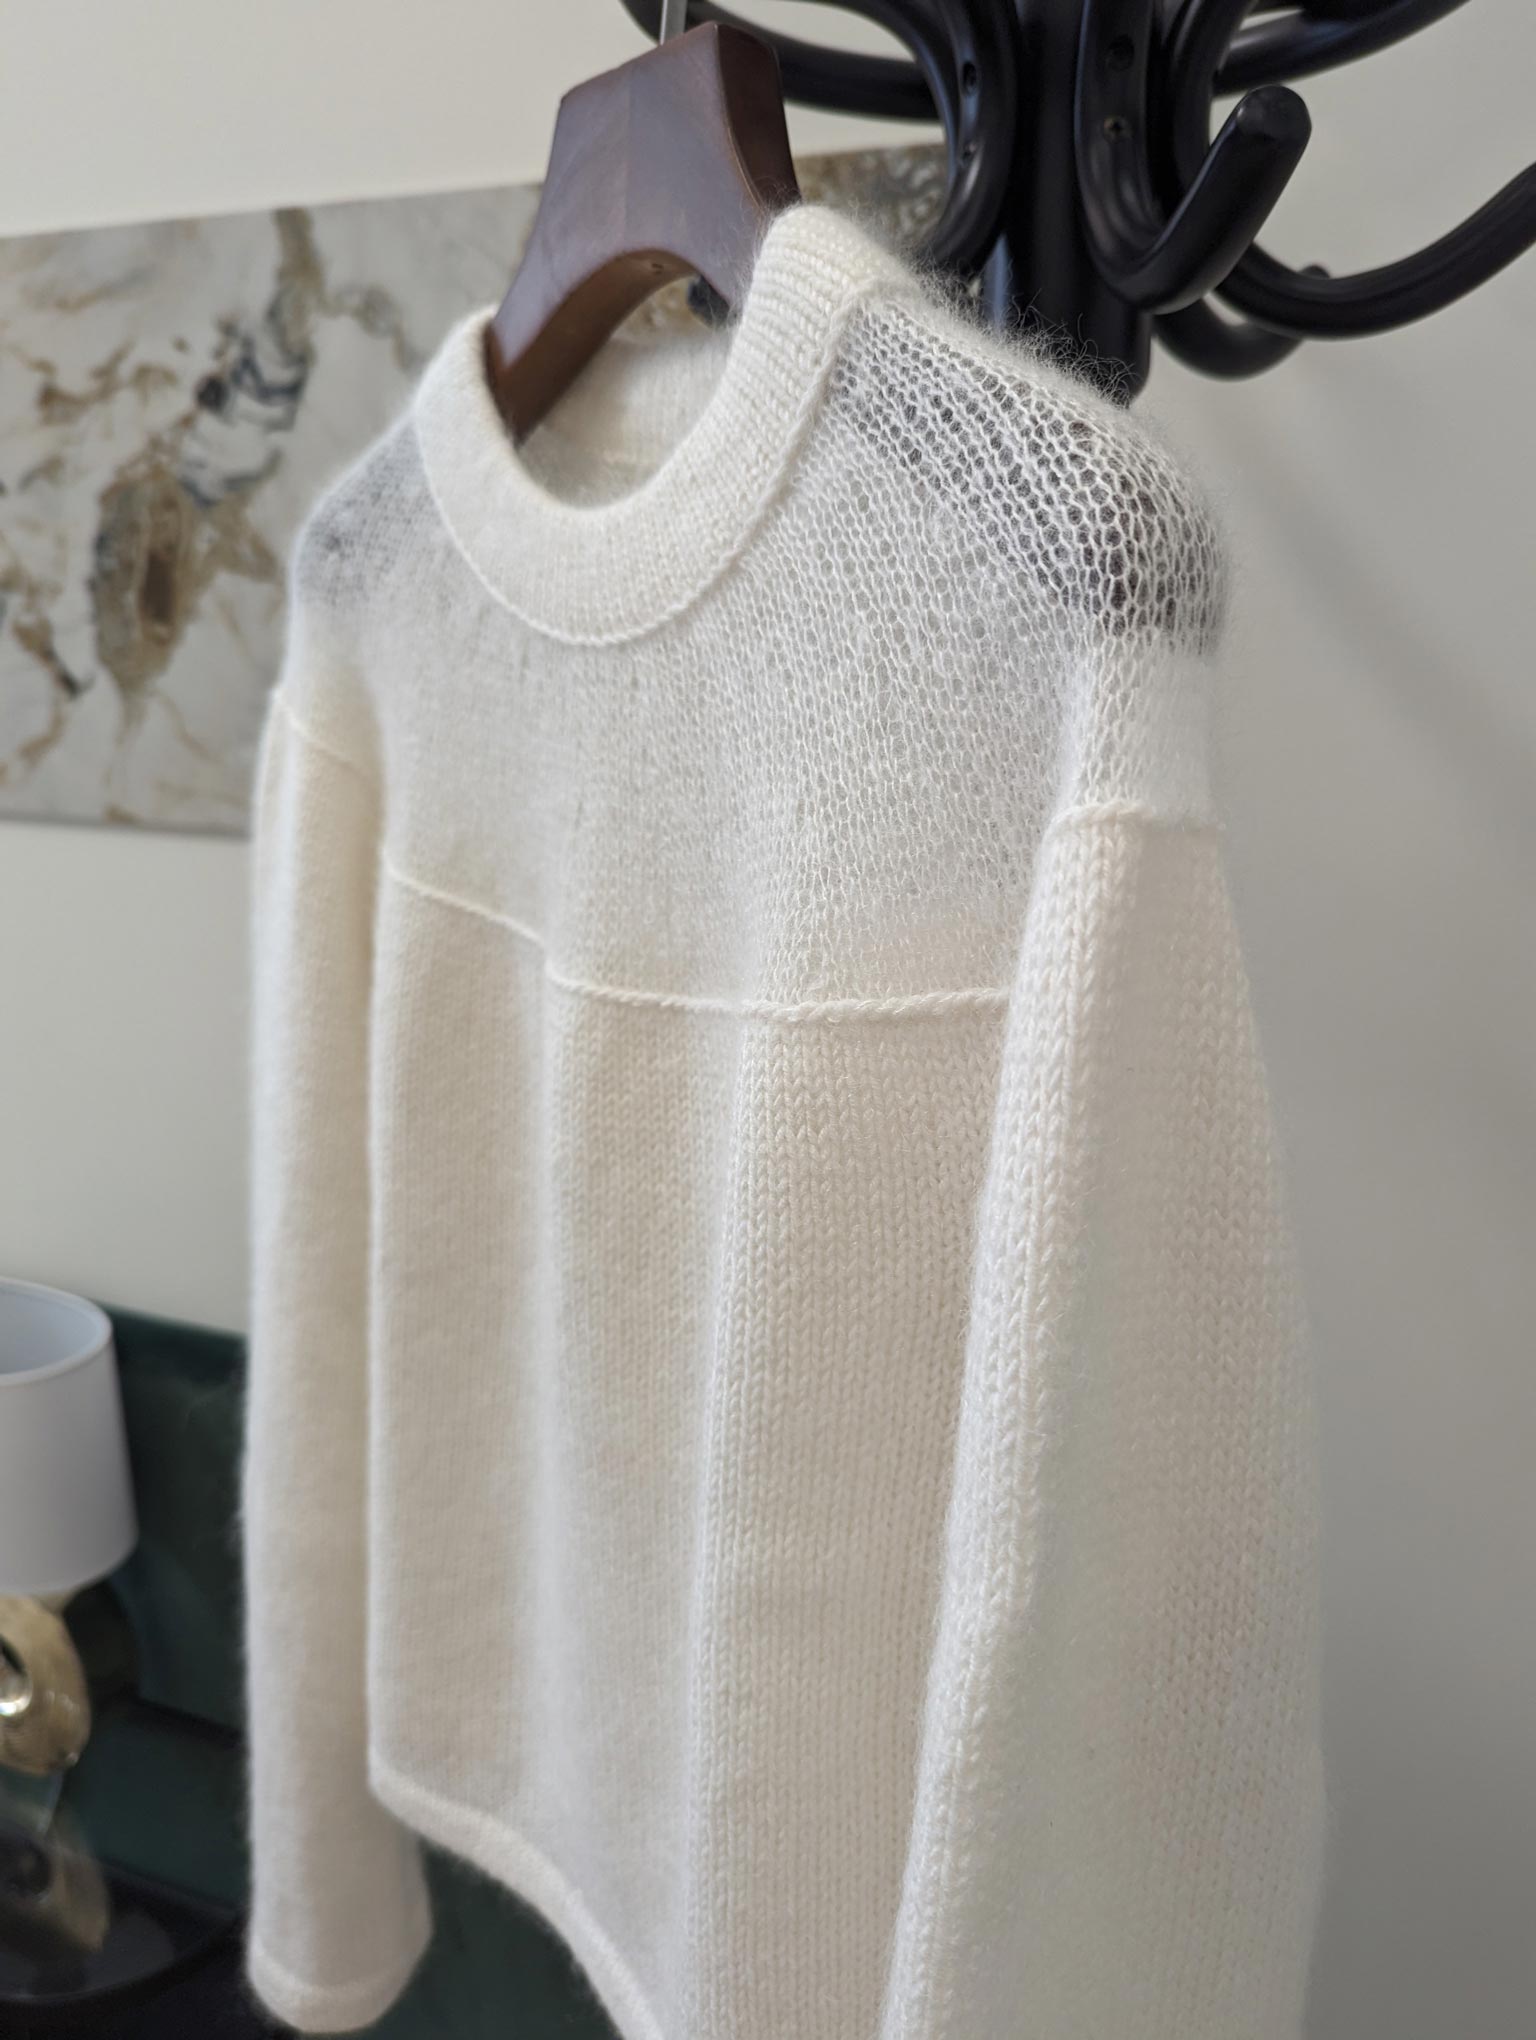 Knitted blouse with top down construction and crew neck